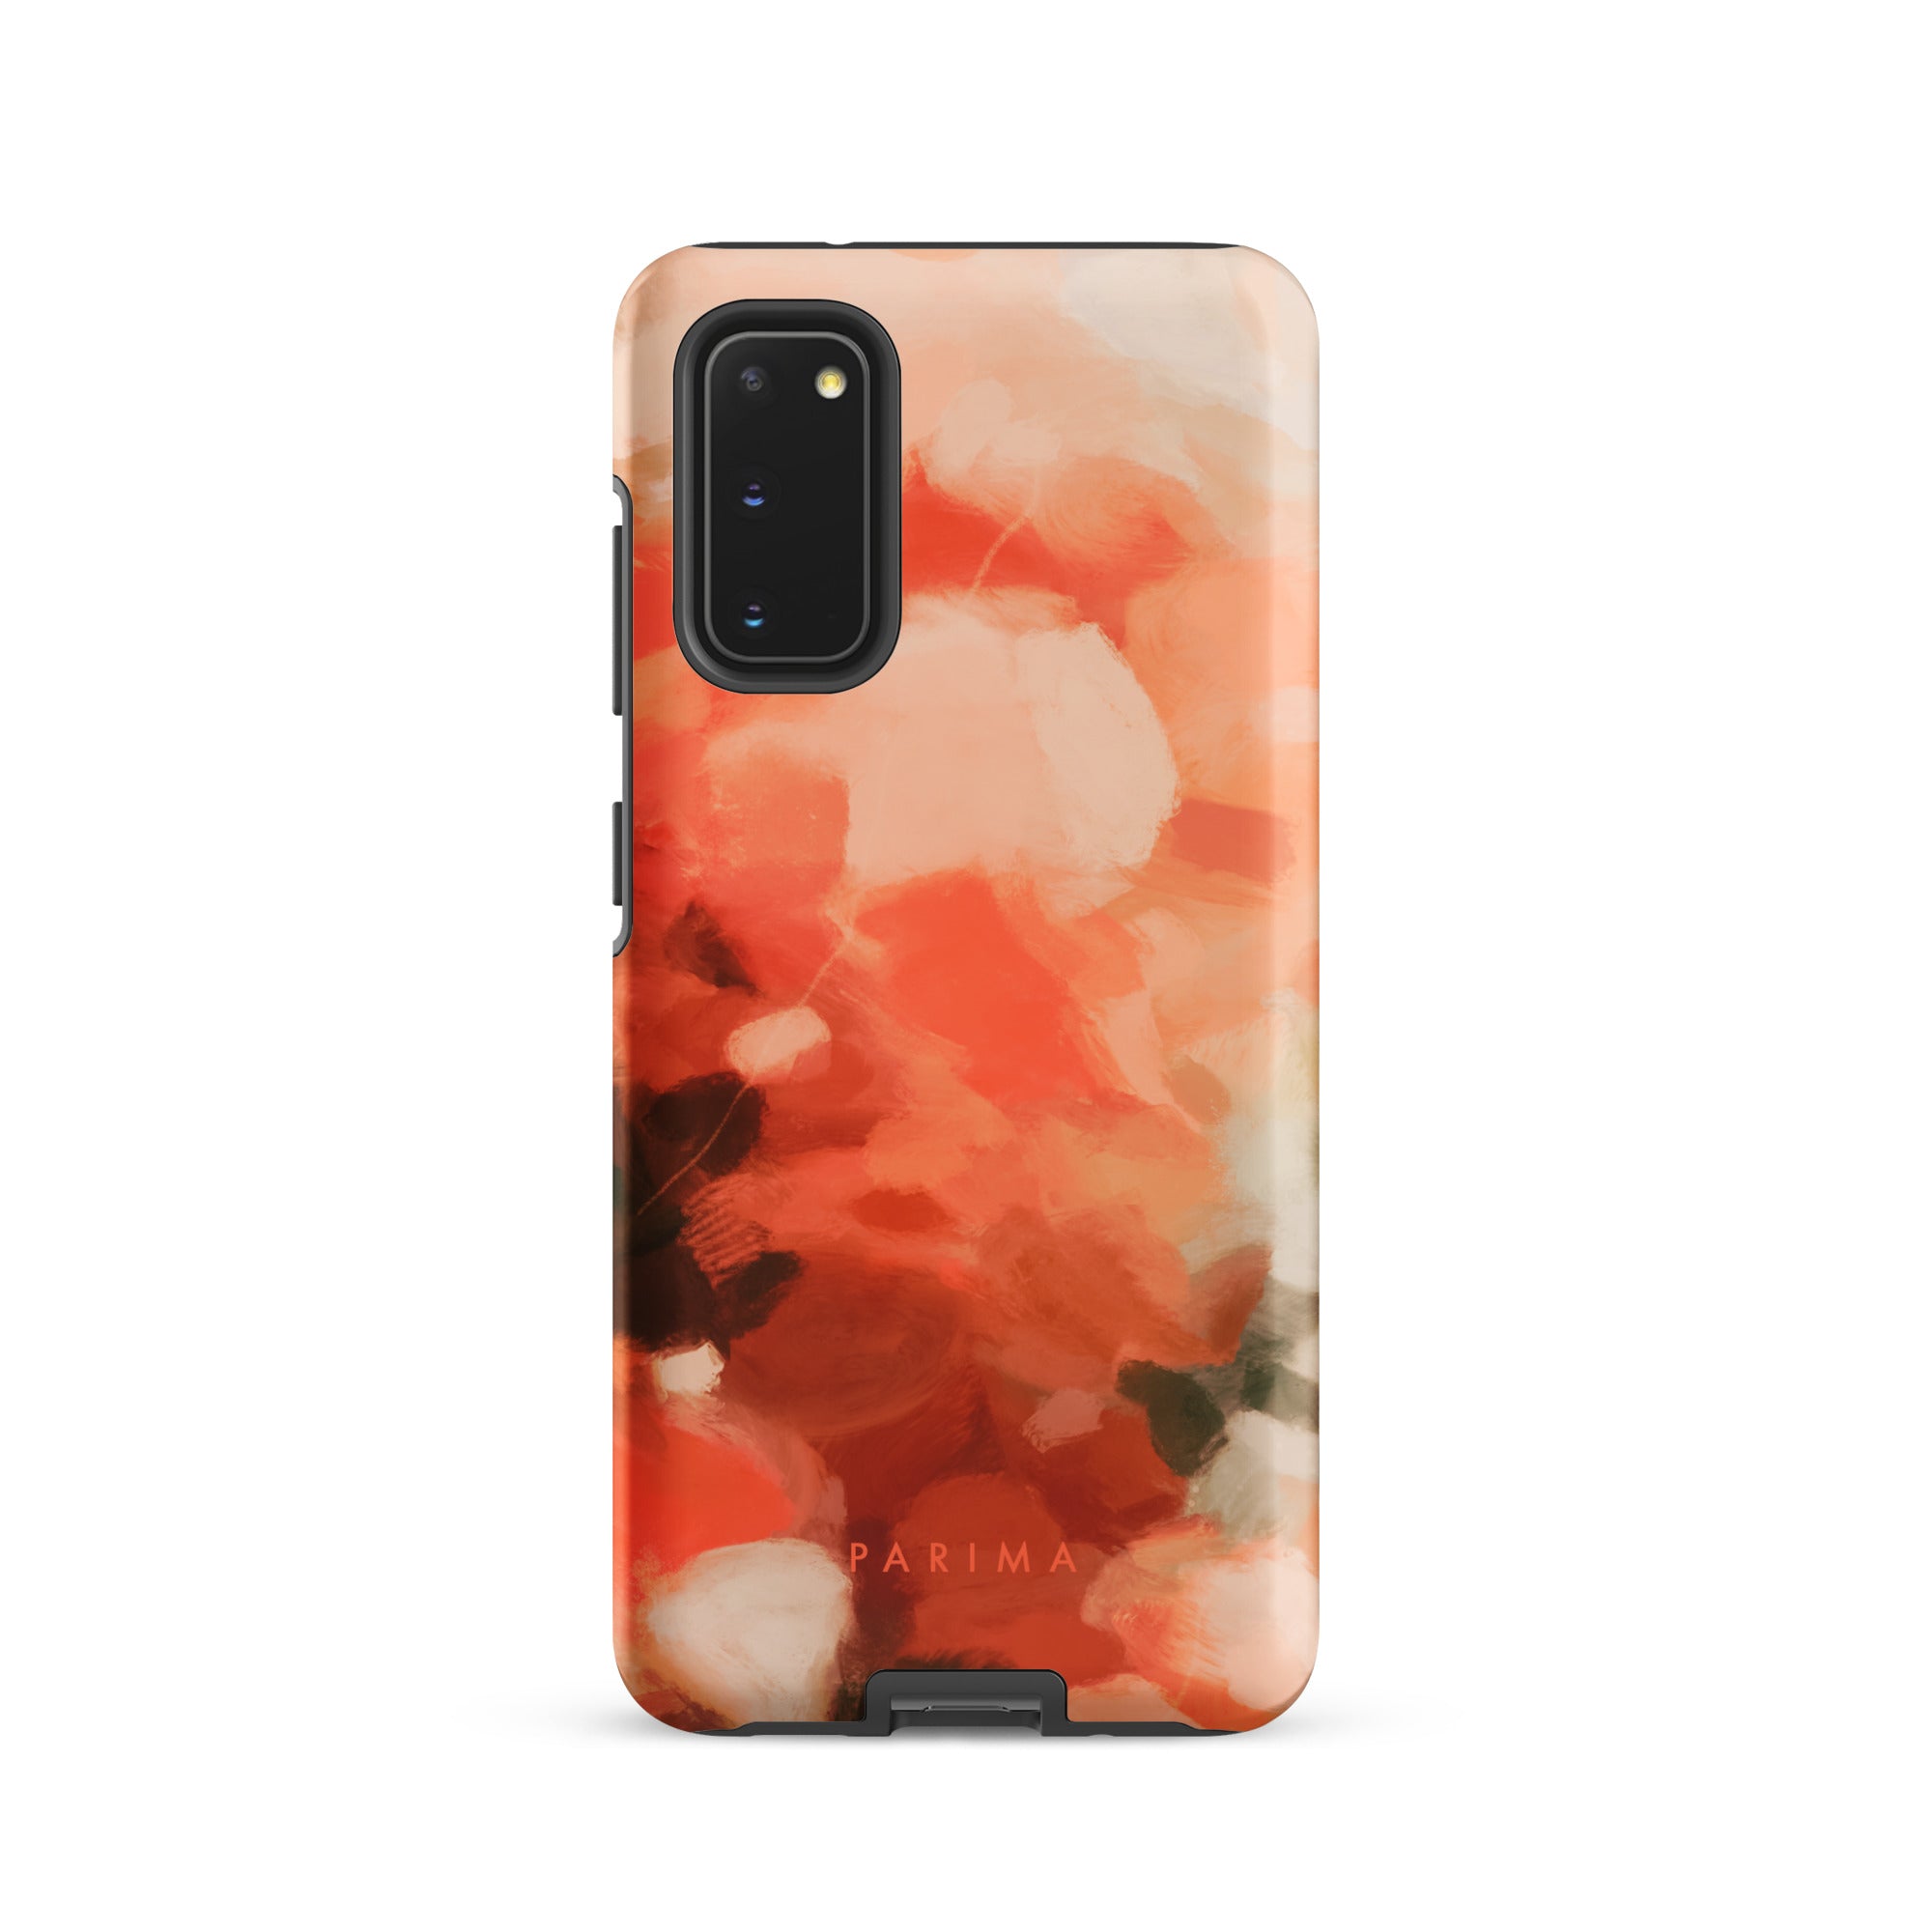 Sweet Nectar, orange and pink abstract art on Samsung Galaxy S20 tough case by Parima Studio